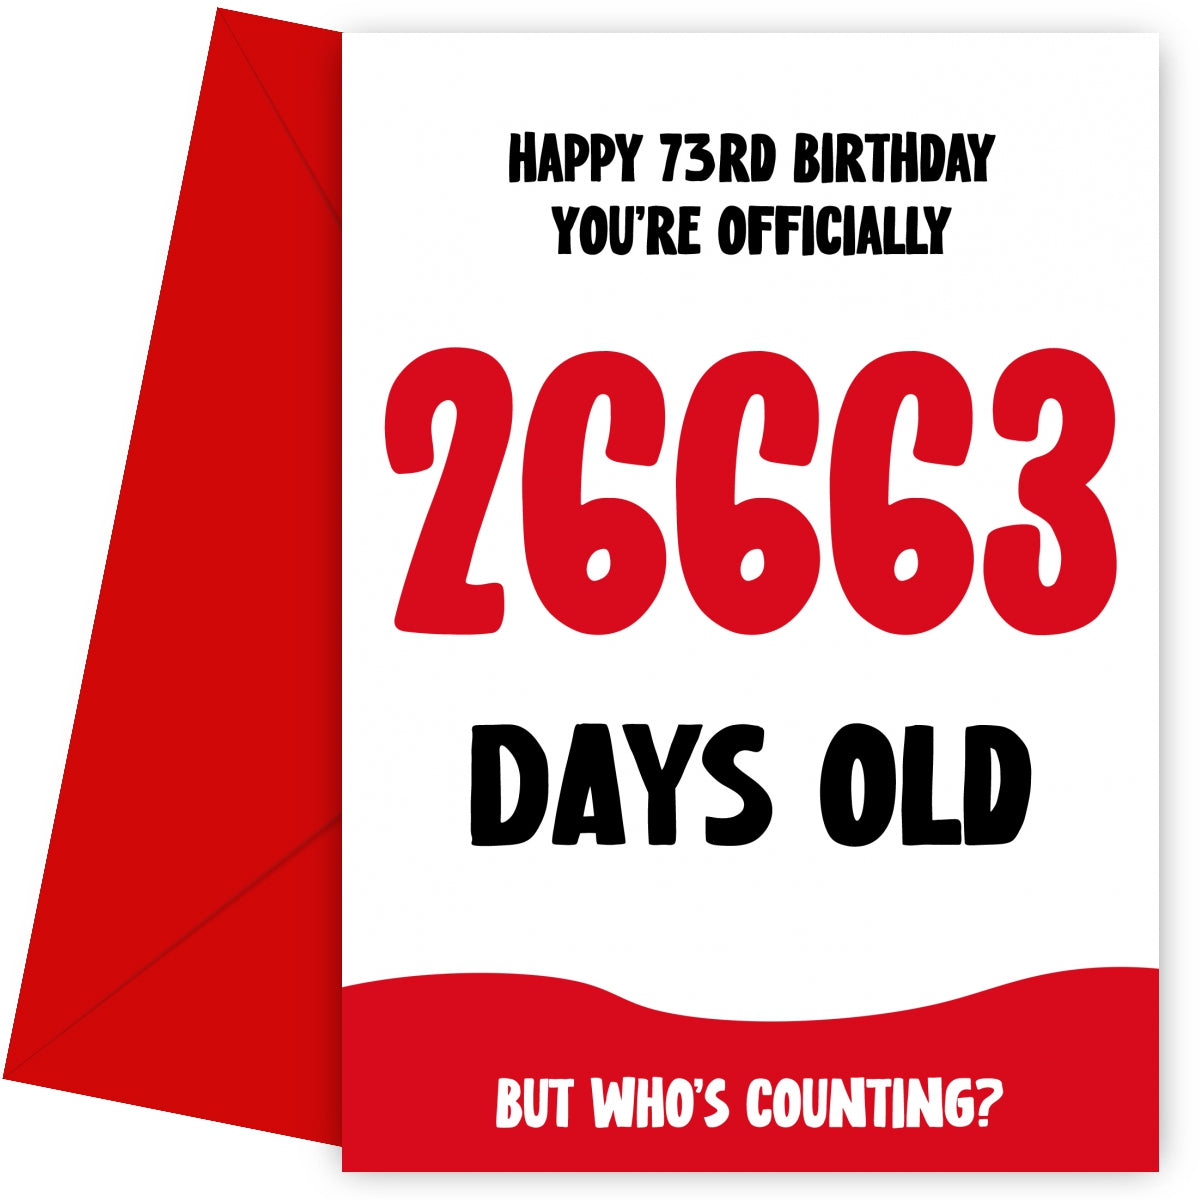 Funny 73rd Birthday Card for Men and Women - 26663 Days Old